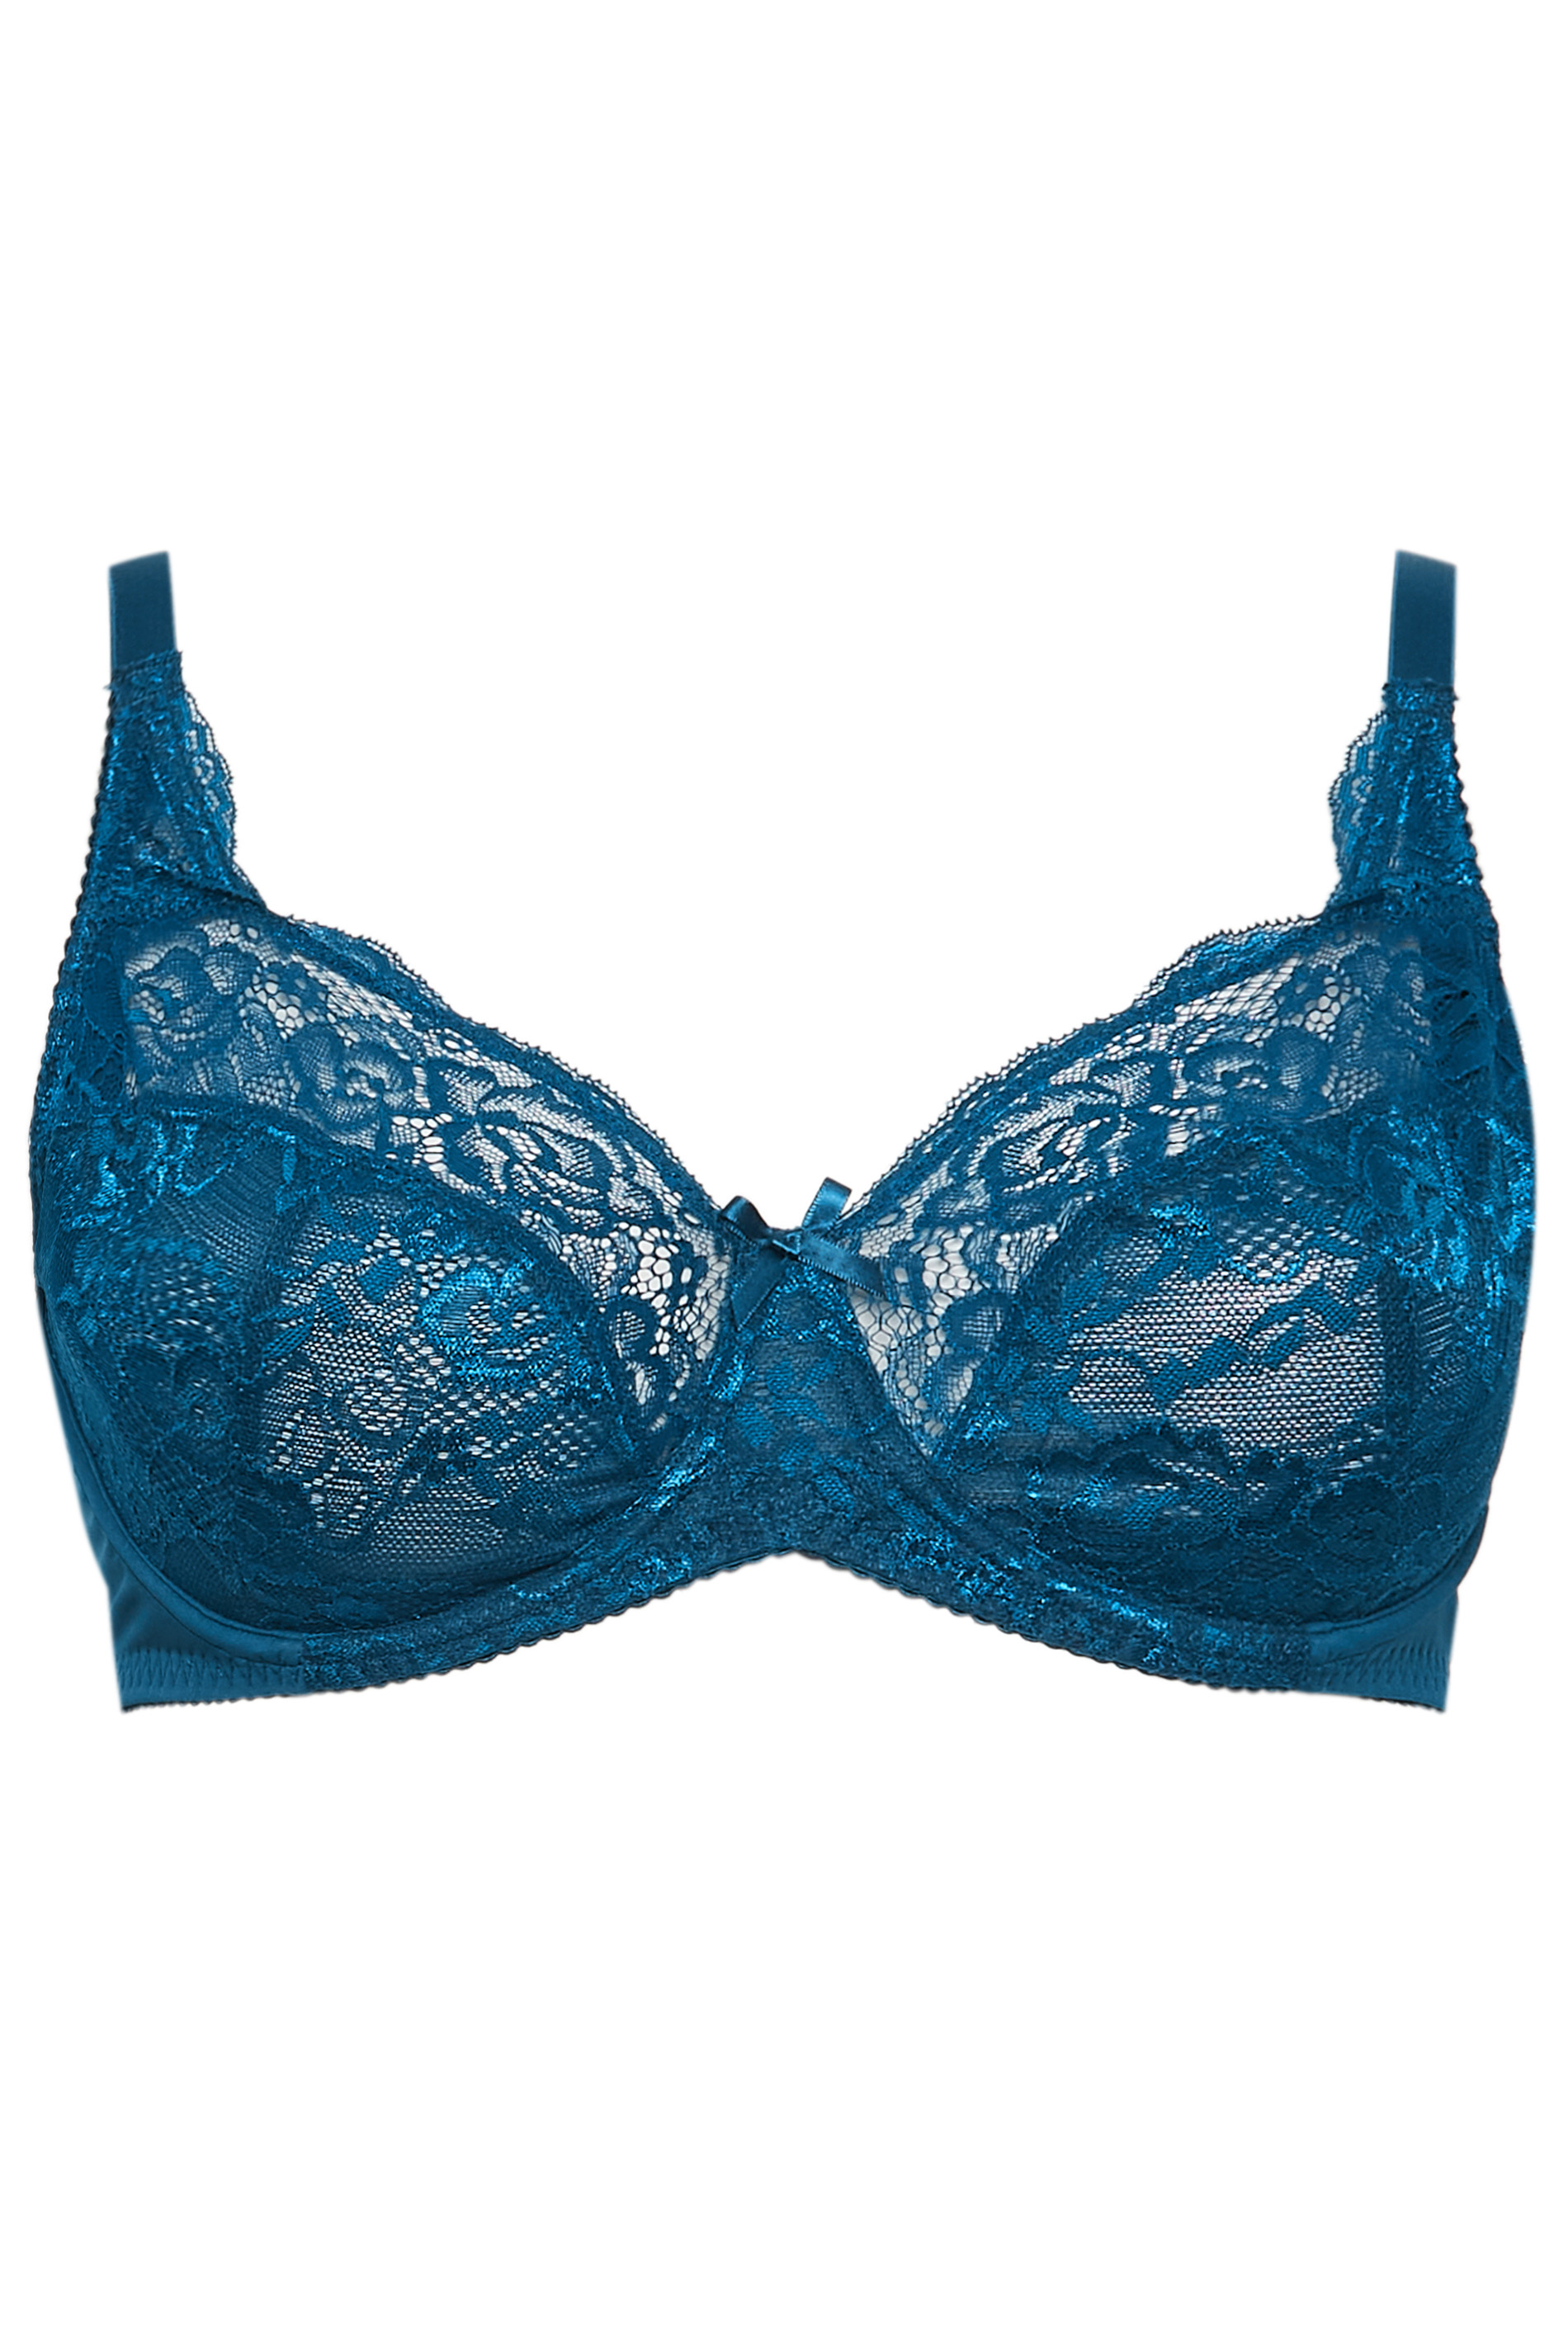 YOURS Plus Size Teal Green Stretch Lace Non-Padded Underwired Balcony Bra